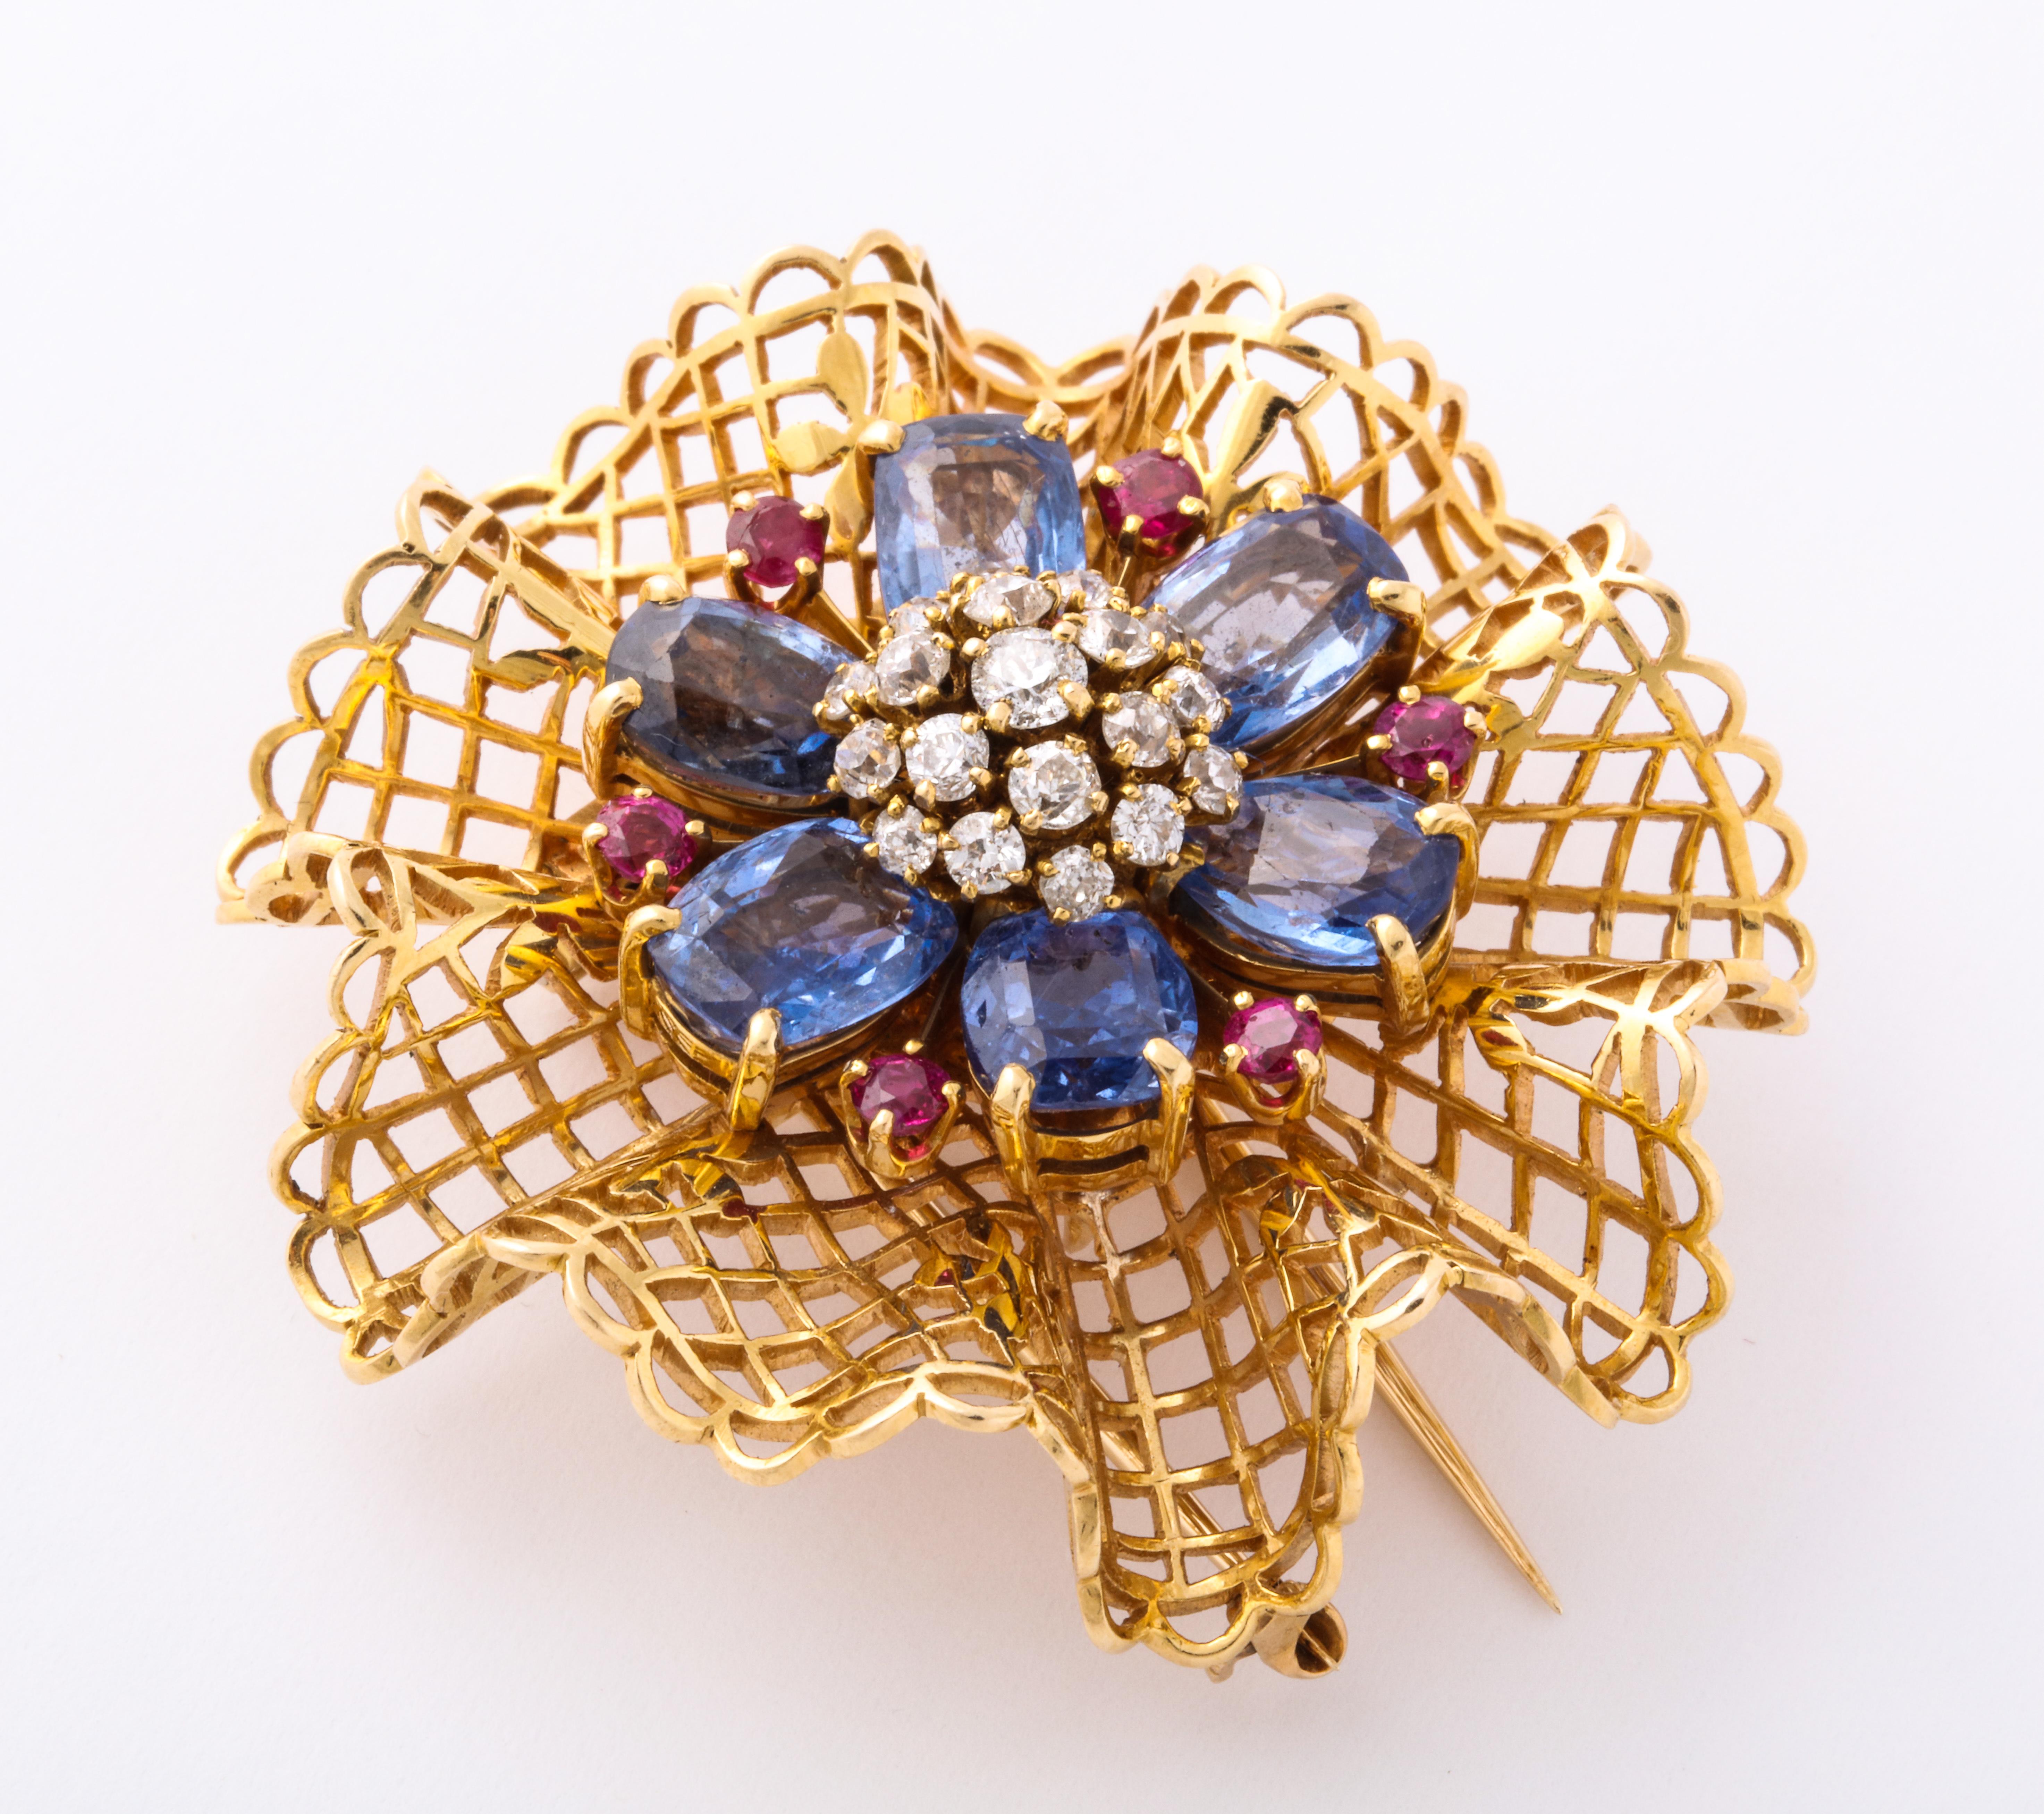 This stylish dentelle brooch made by the legendary Van Cleef and Arpels uses diamonds rubies and sapphires to depict a floral shape. 

Inspired by a ballerina's dress. A classic VCA motif

Signed and serial numbered

For similar see page 214 Van